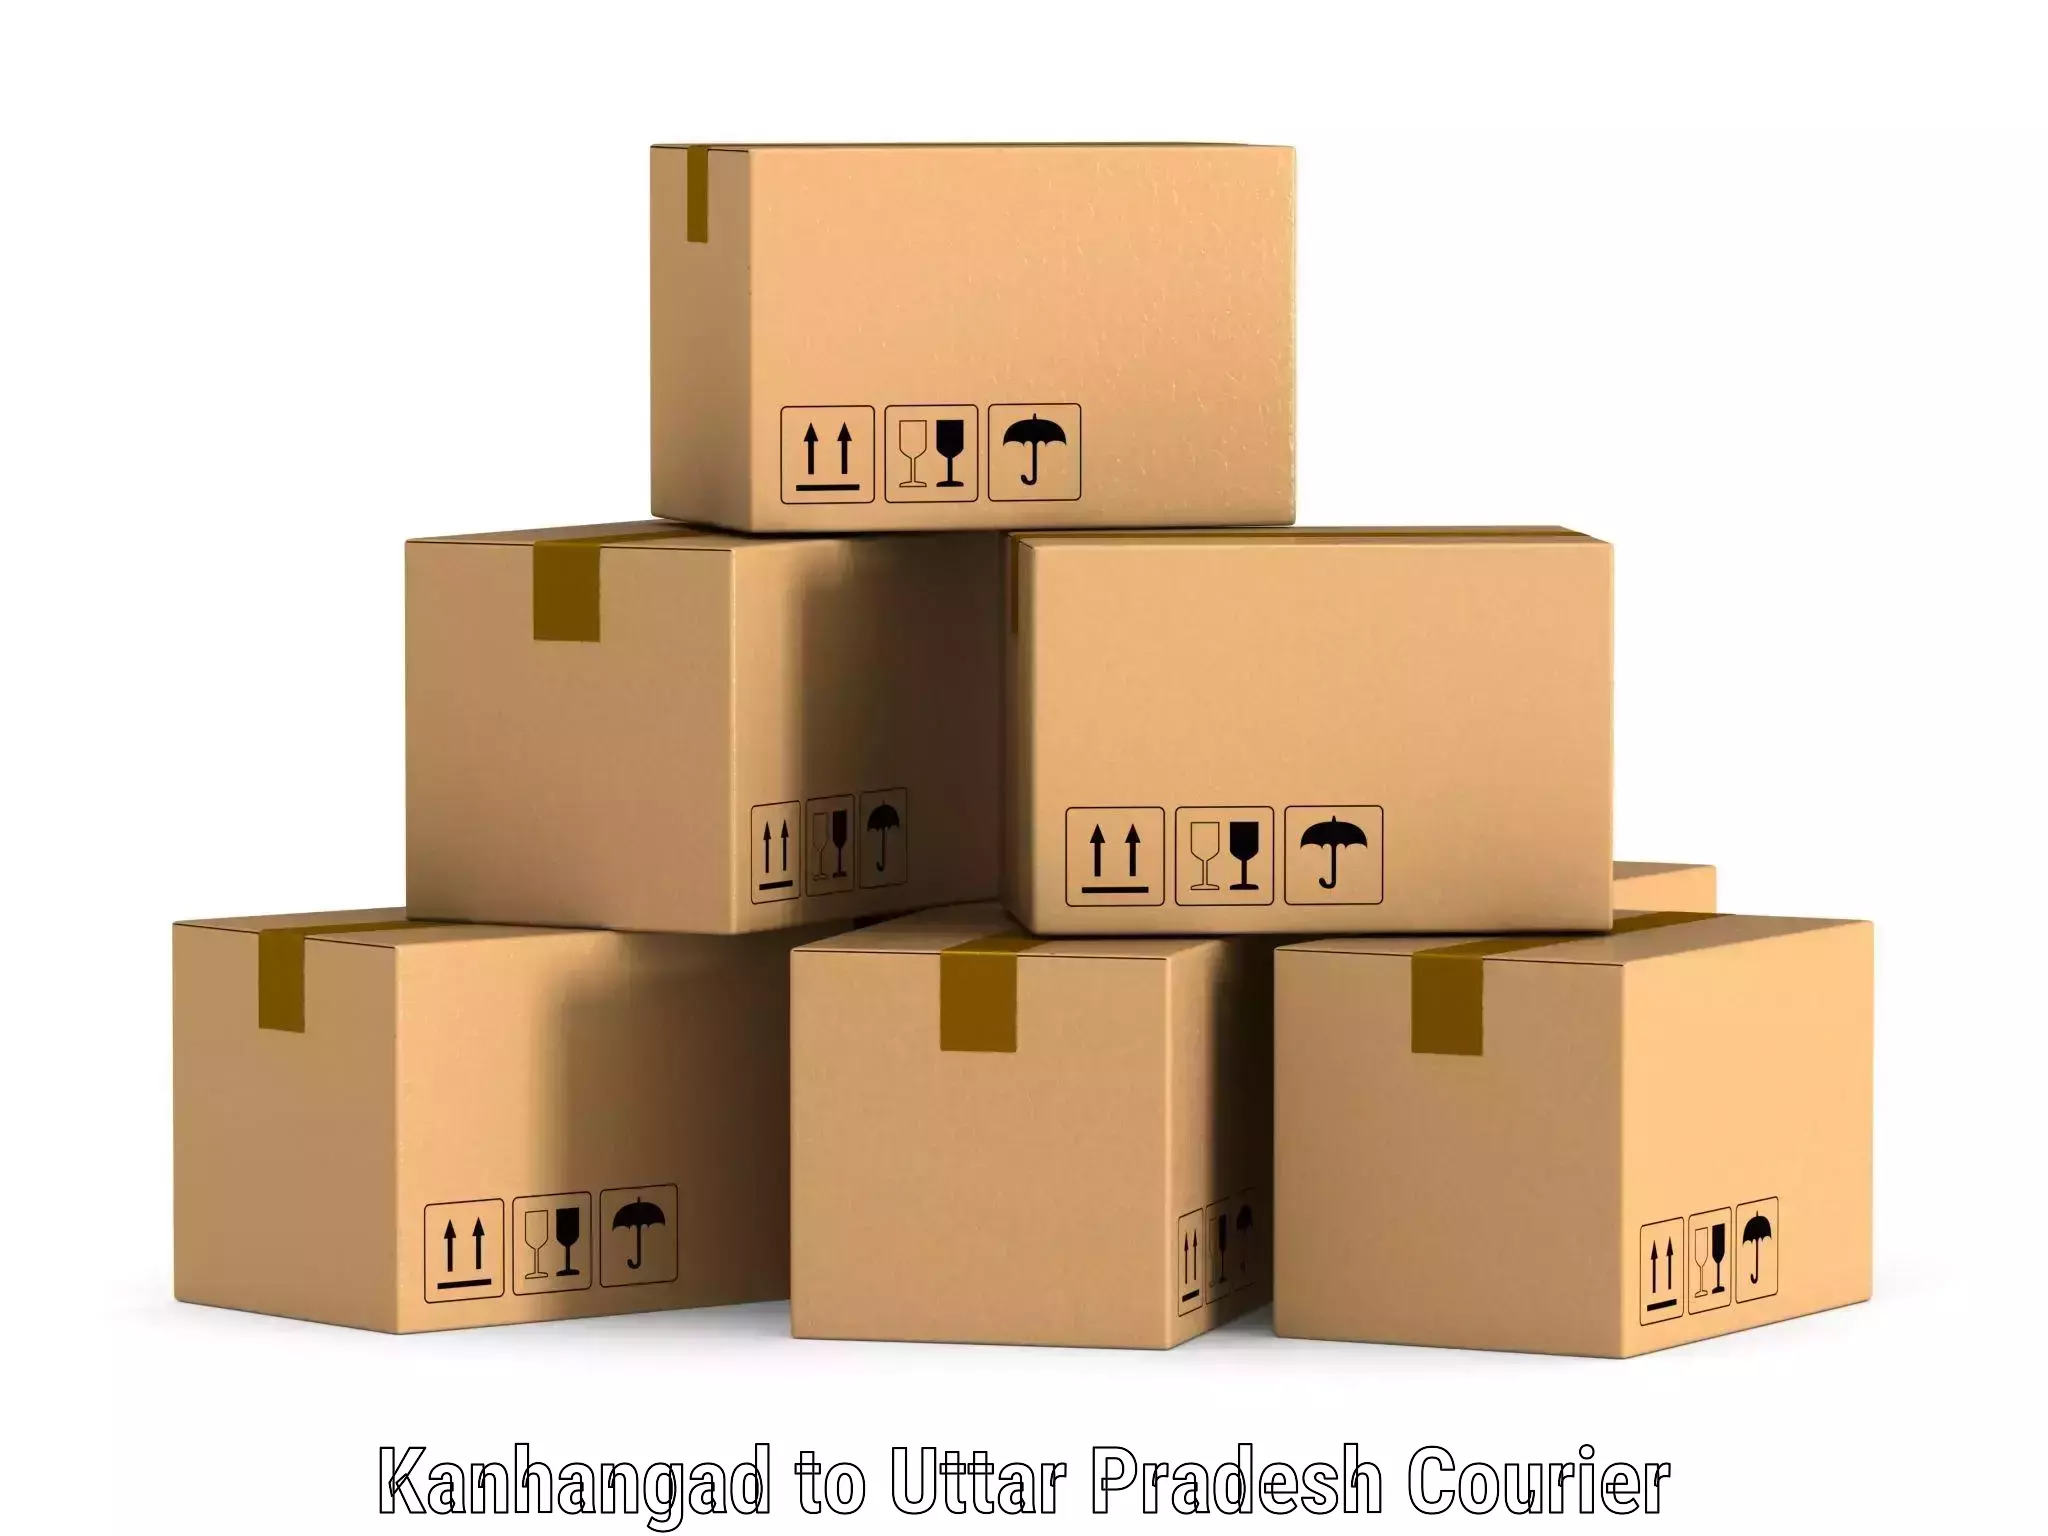 Reliable courier service Kanhangad to Poonchh